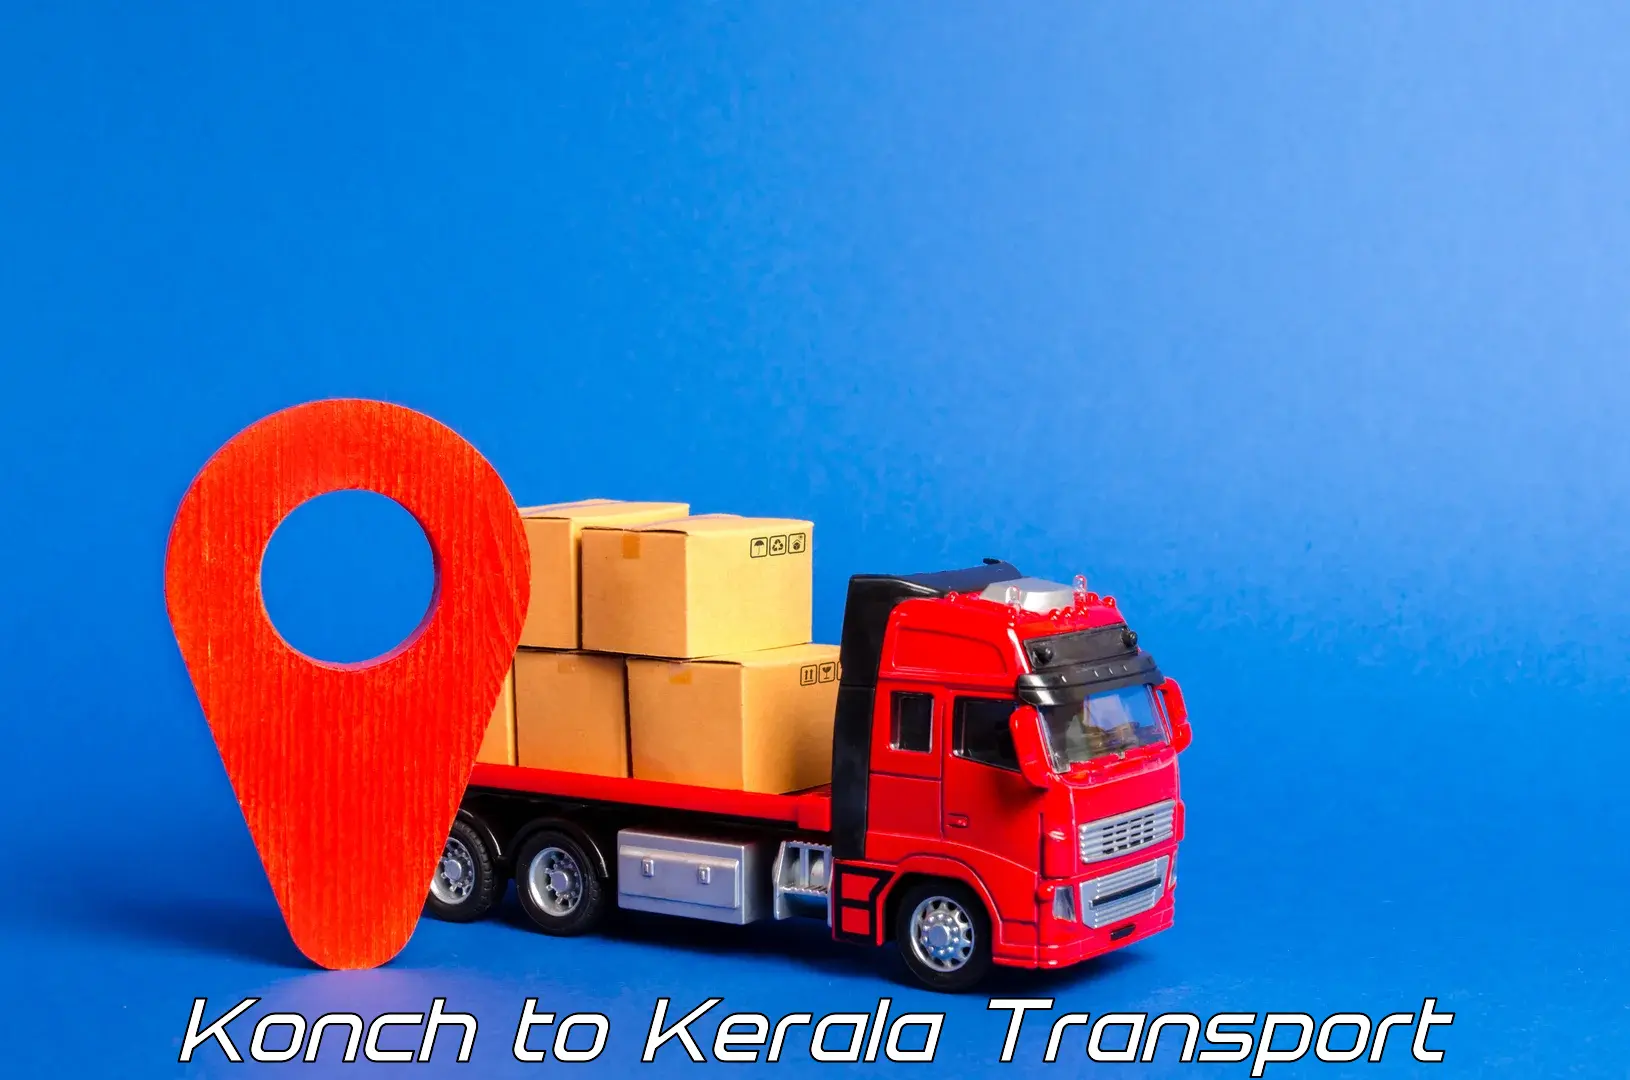 Container transportation services Konch to Kerala